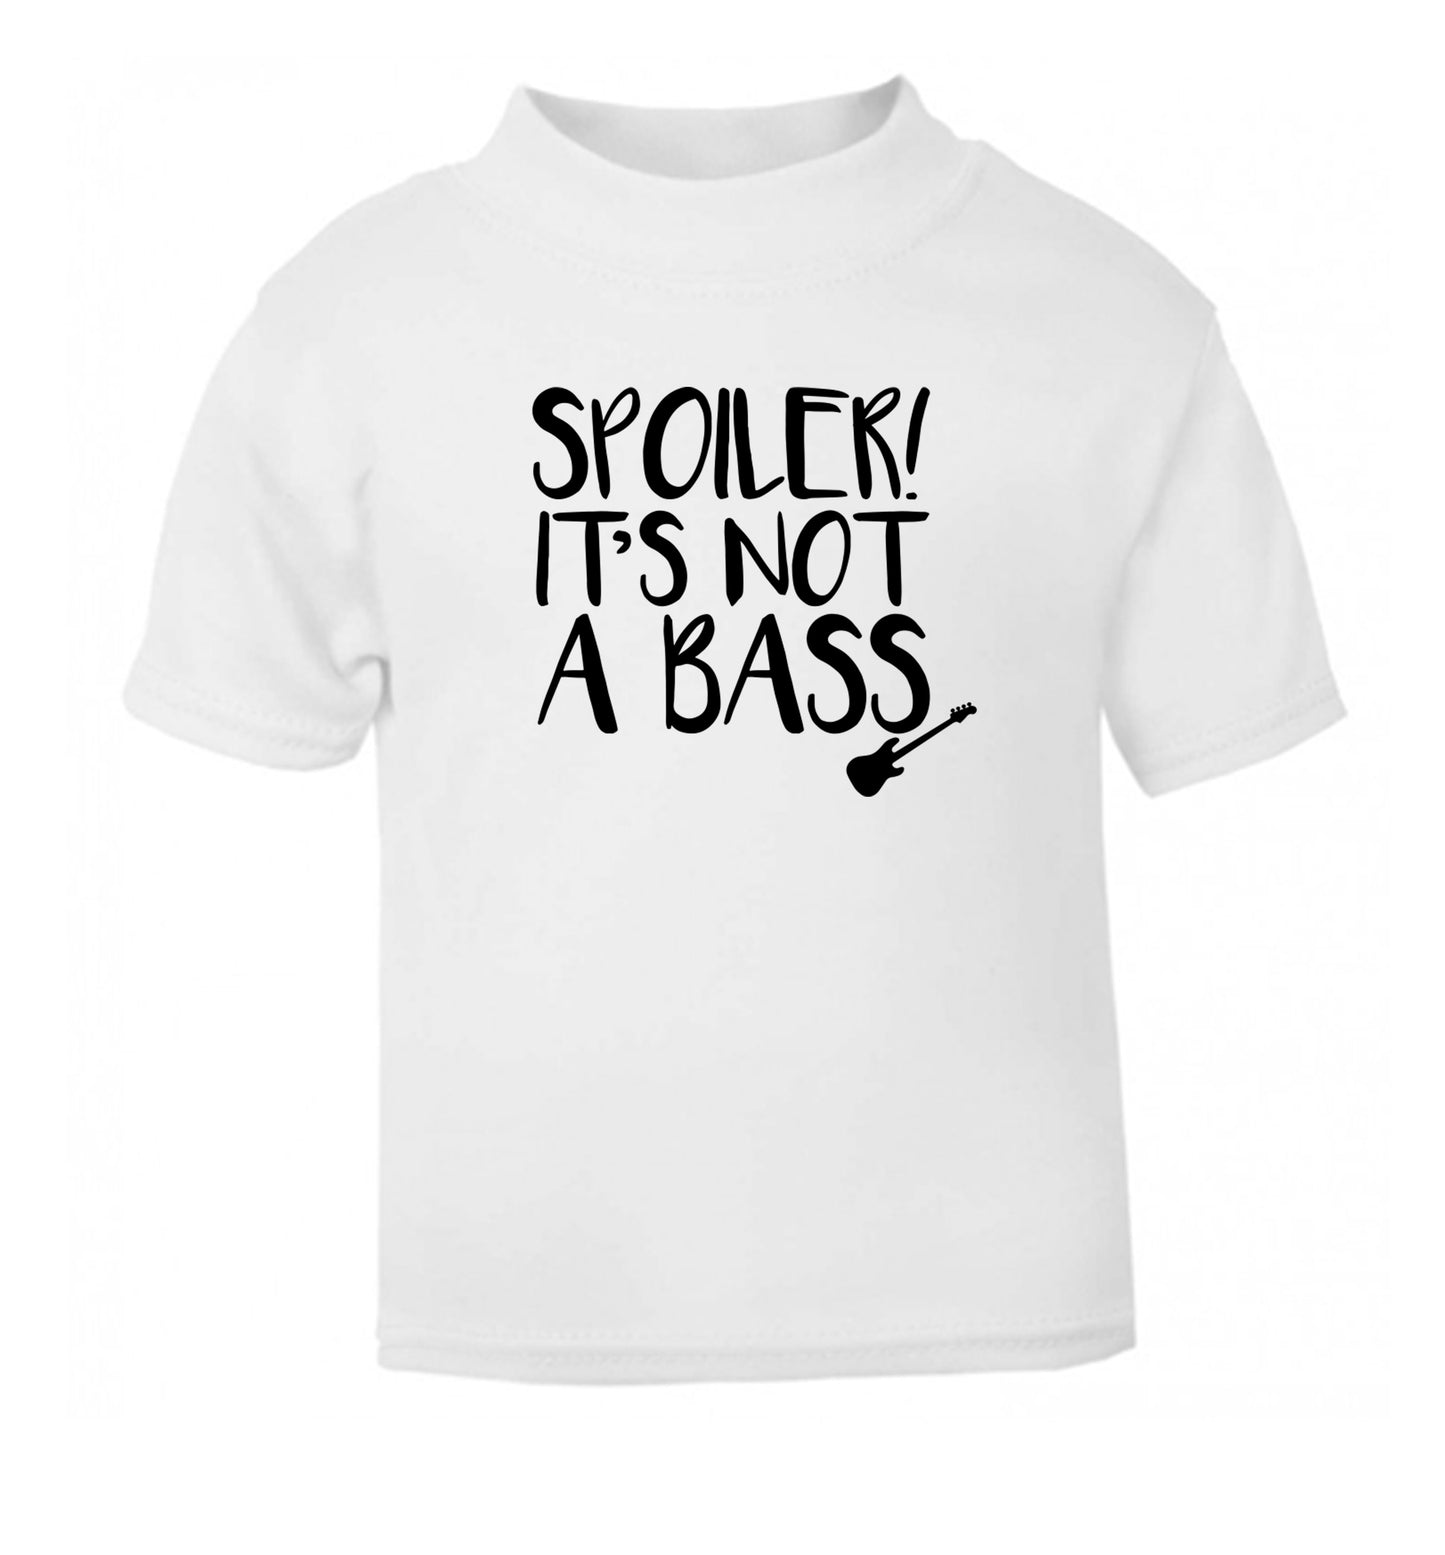 Spoiler it's not a bass white Baby Toddler Tshirt 2 Years